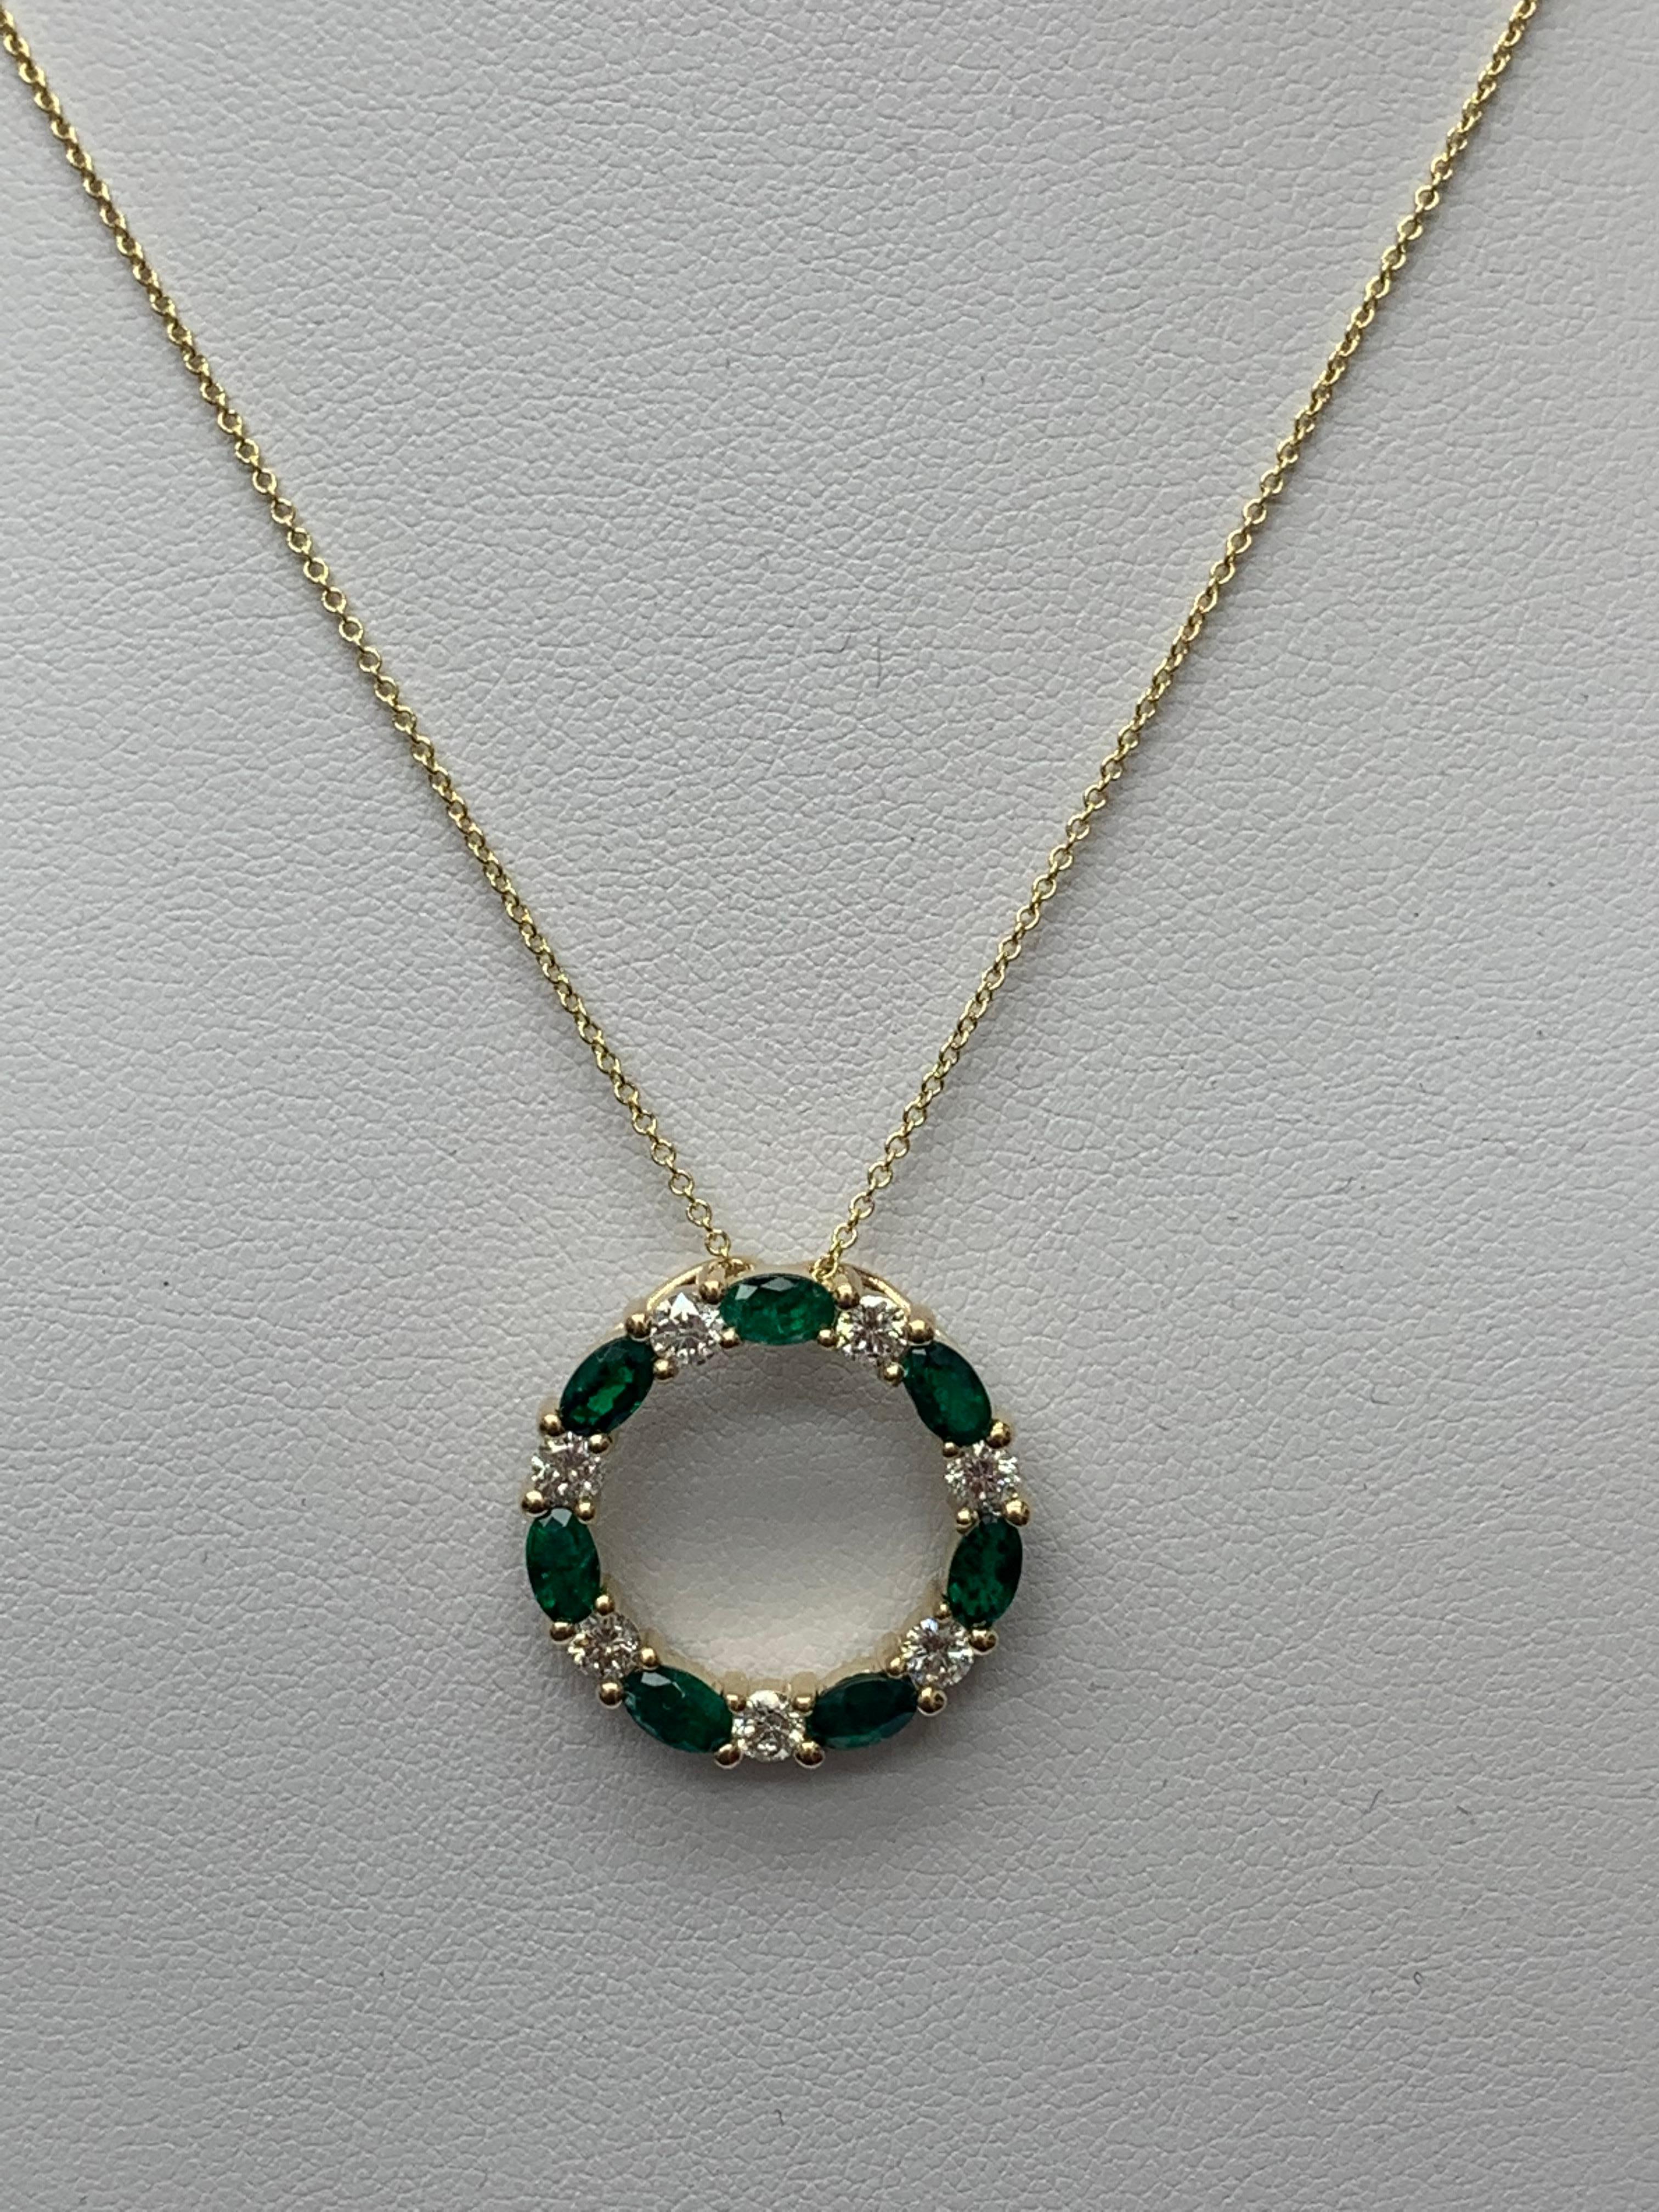 Modern 1.65 Carat Emerald and Diamond Circle Pendant Necklace in 14k Yellow Gold For Sale